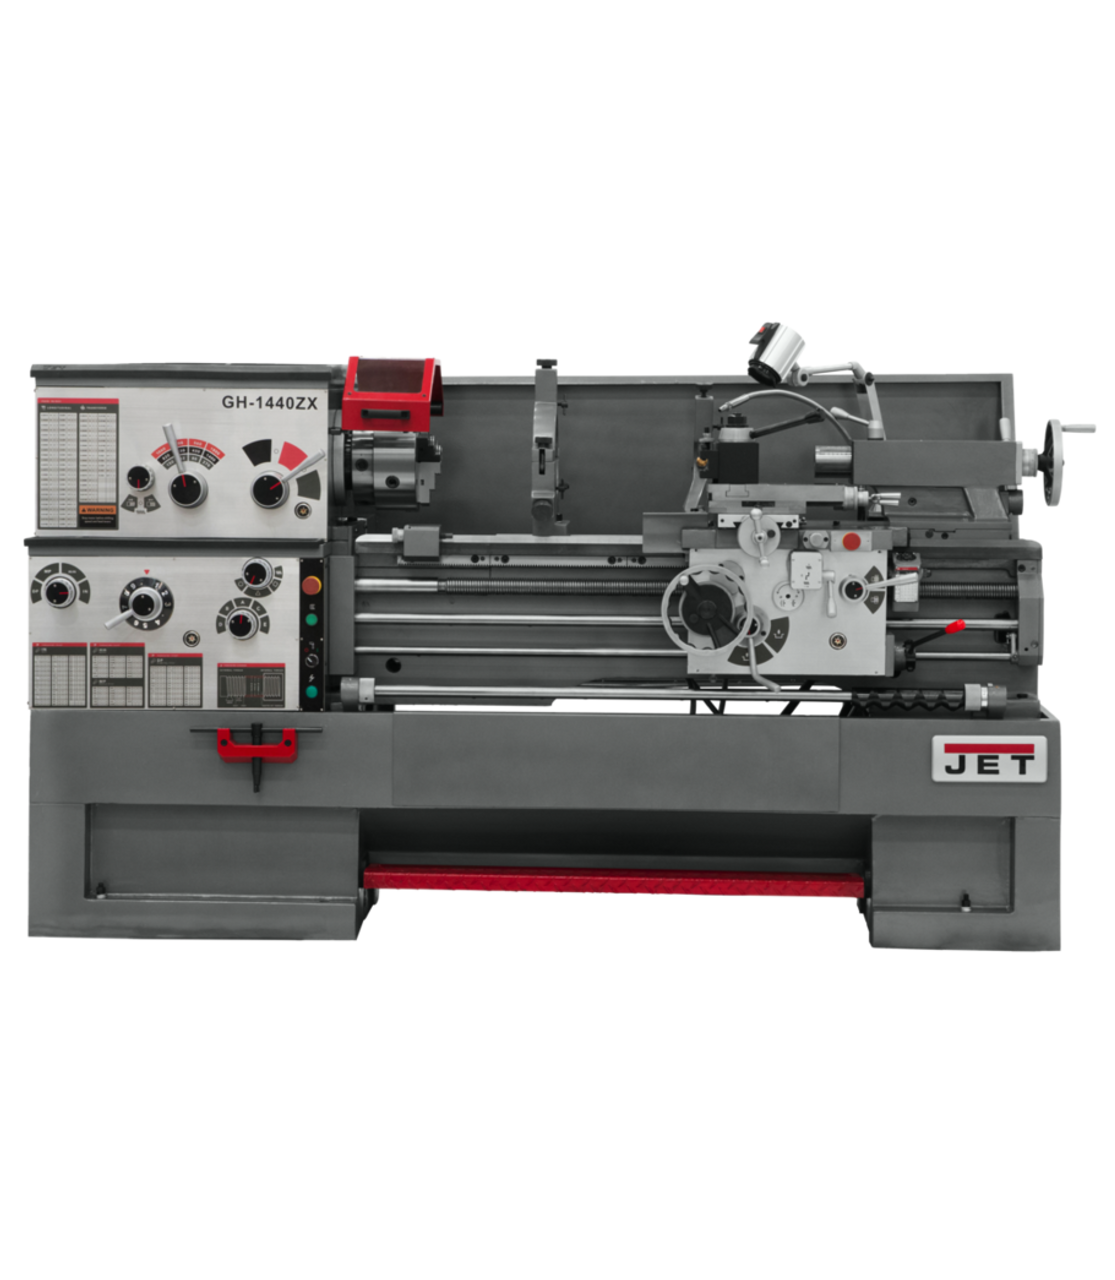 JET GH-1440ZX Large Spindle Bore Lathe with ACU-RITE 203 DRO 460V